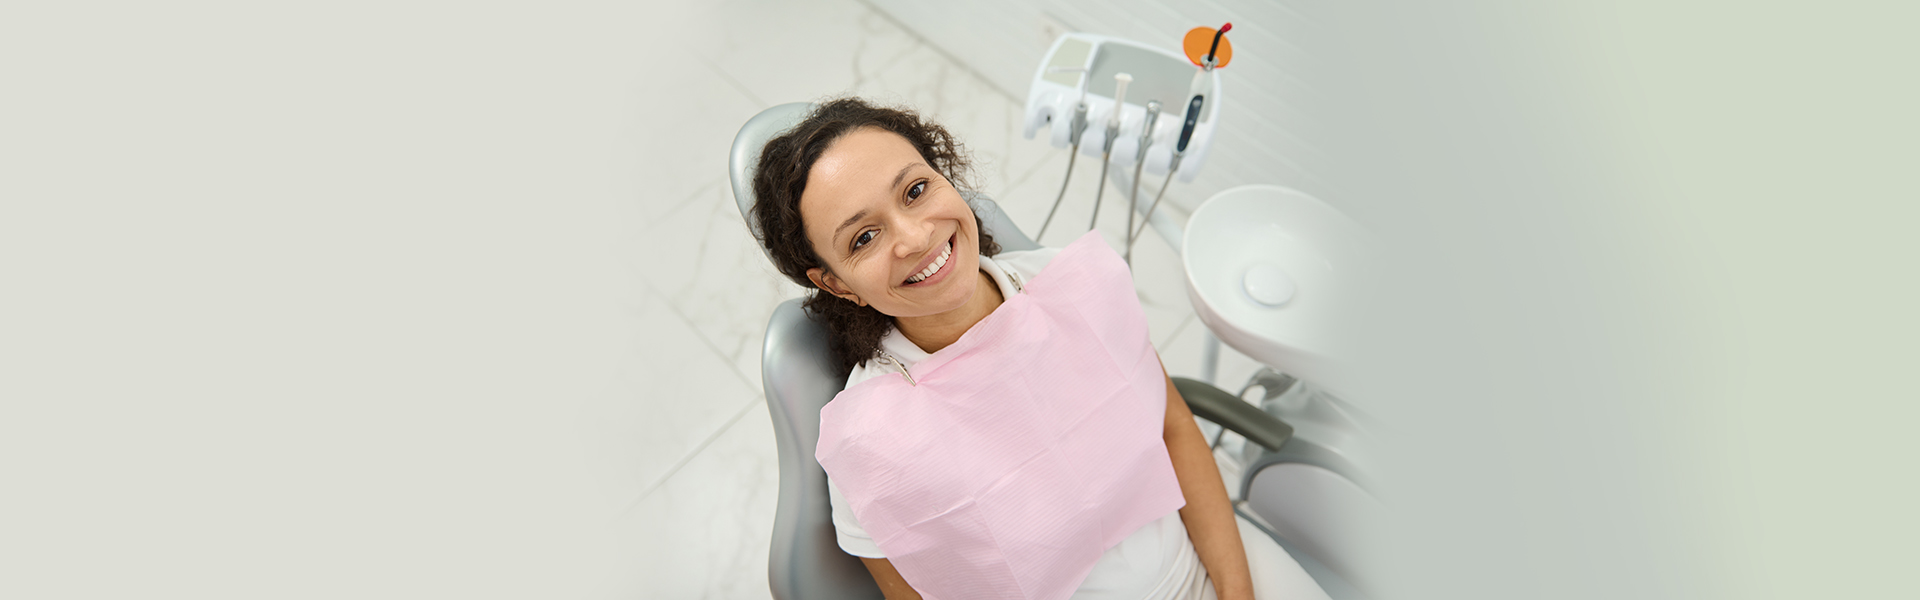 How To Relax With Sedation Dentistry When You Go To The Dentist